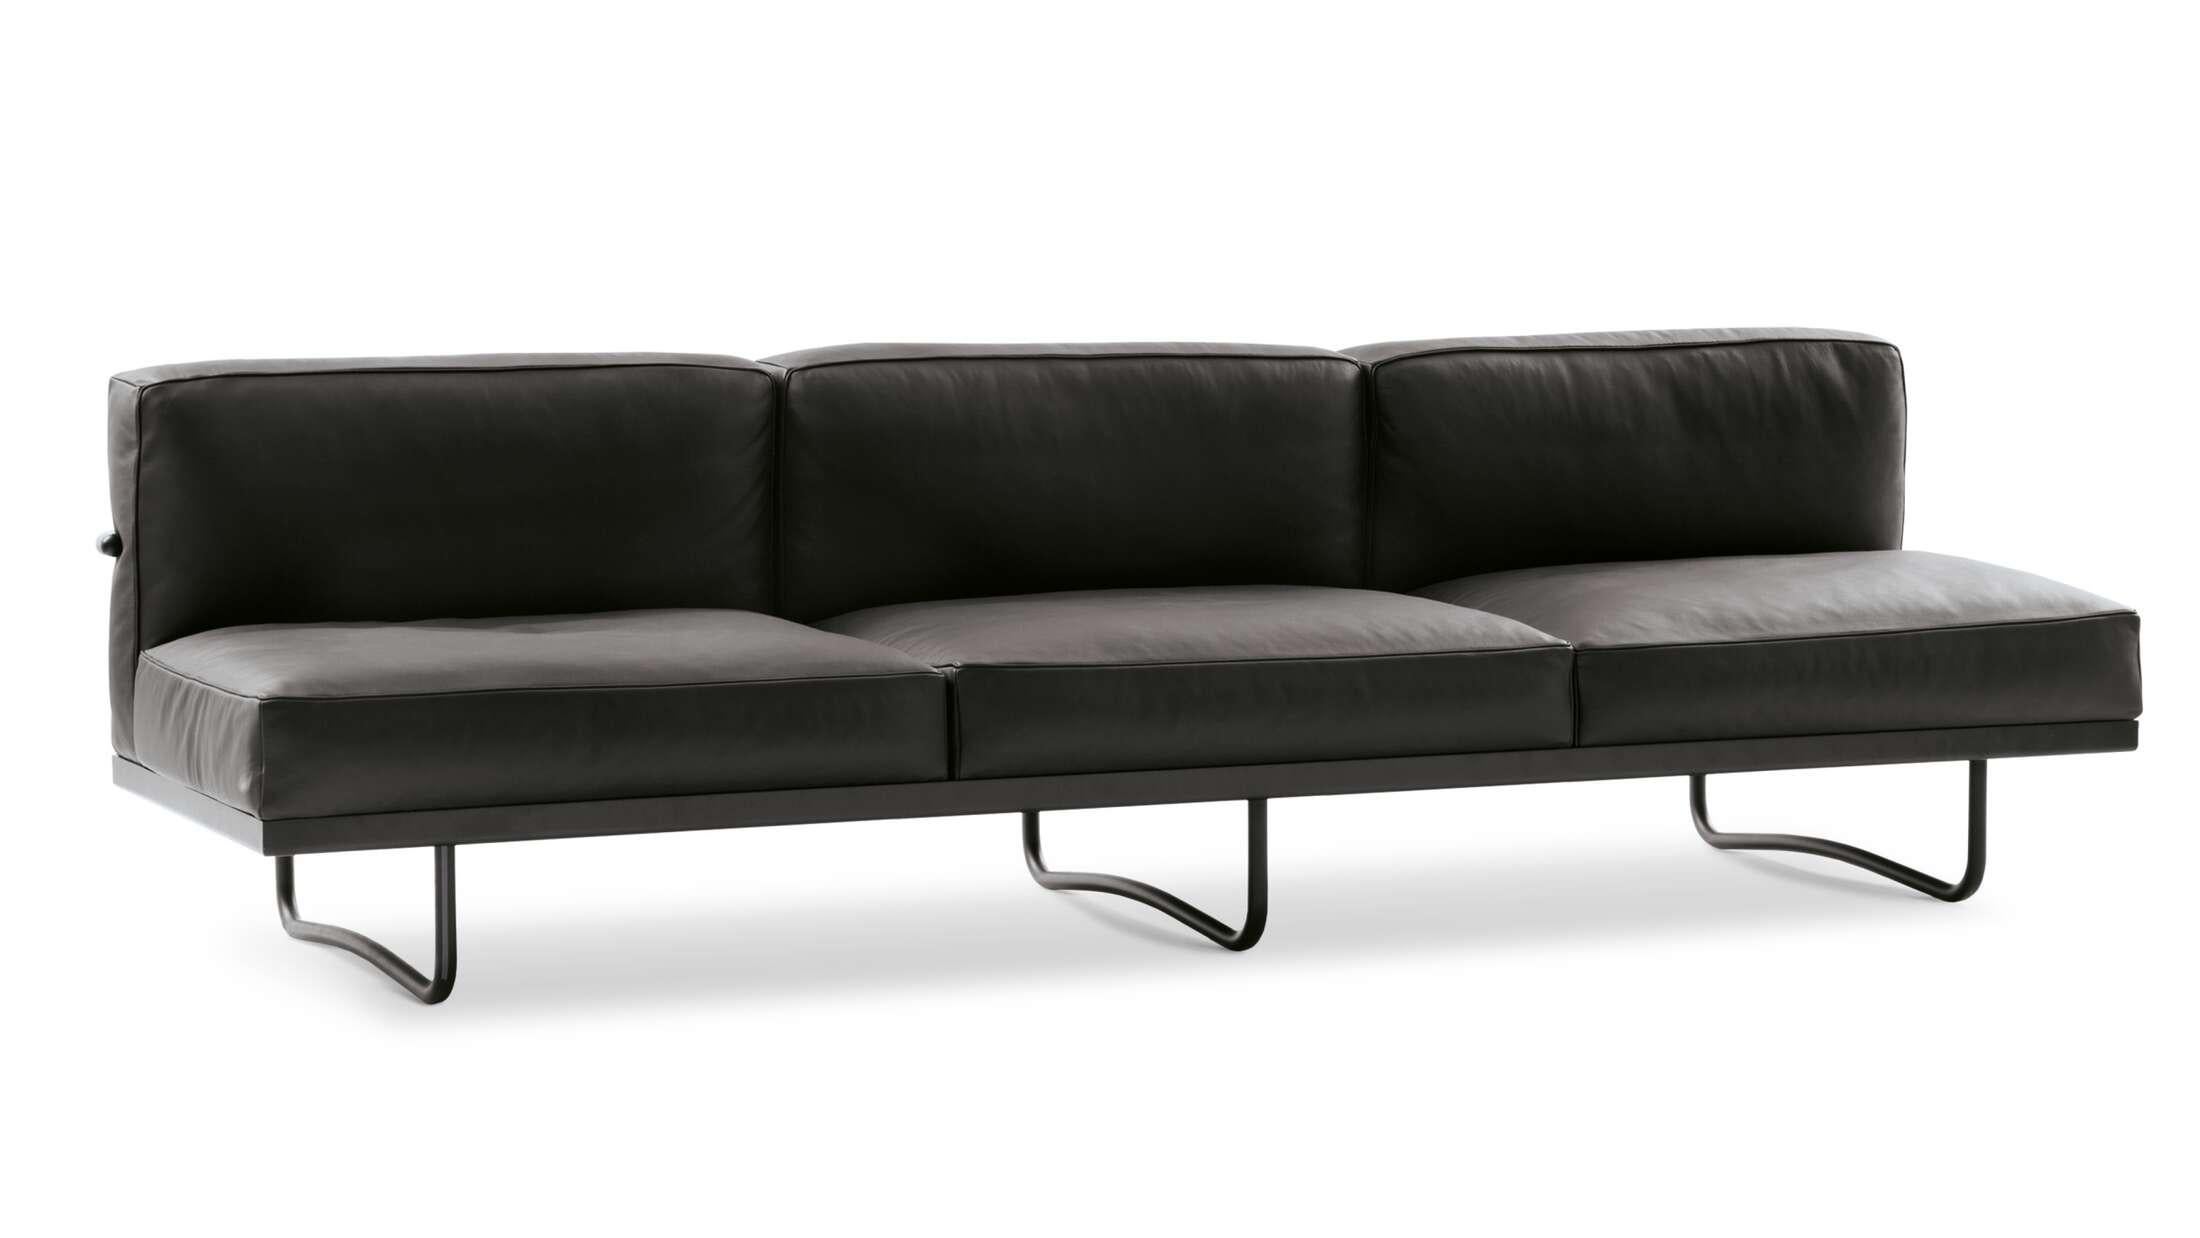 Prices vary dependent on the chosen material and size. Comfortable, contemporary lines distinguish this sofa designed by Le Corbusier for his Paris apartment, where the original model is still preserved – the one that inspired a lengthy re-edition